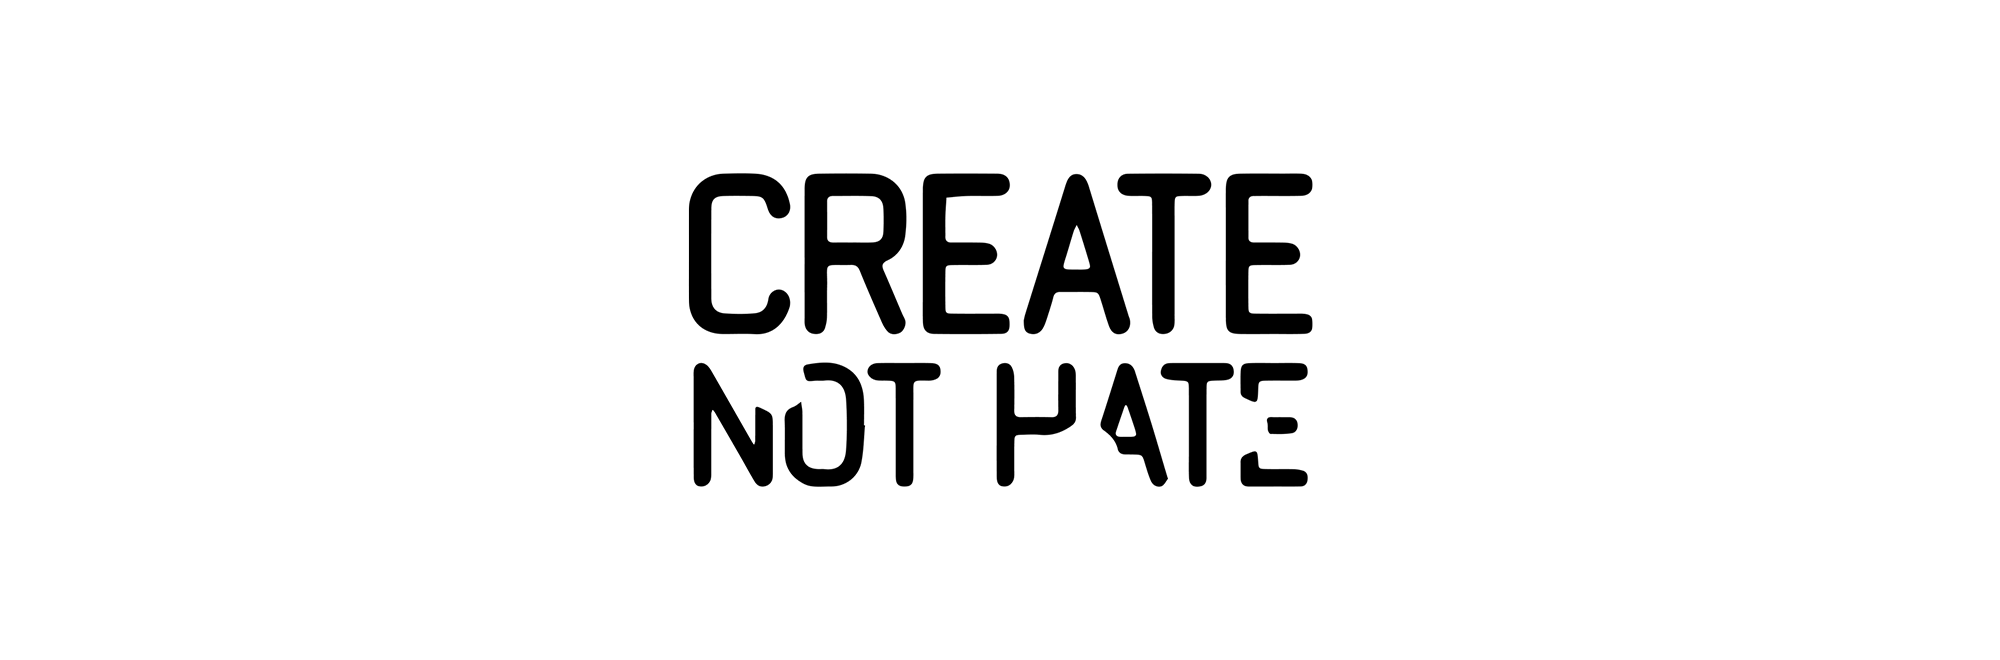 Advertising industry urged to join new Create Not Hate initiative to drive positive change